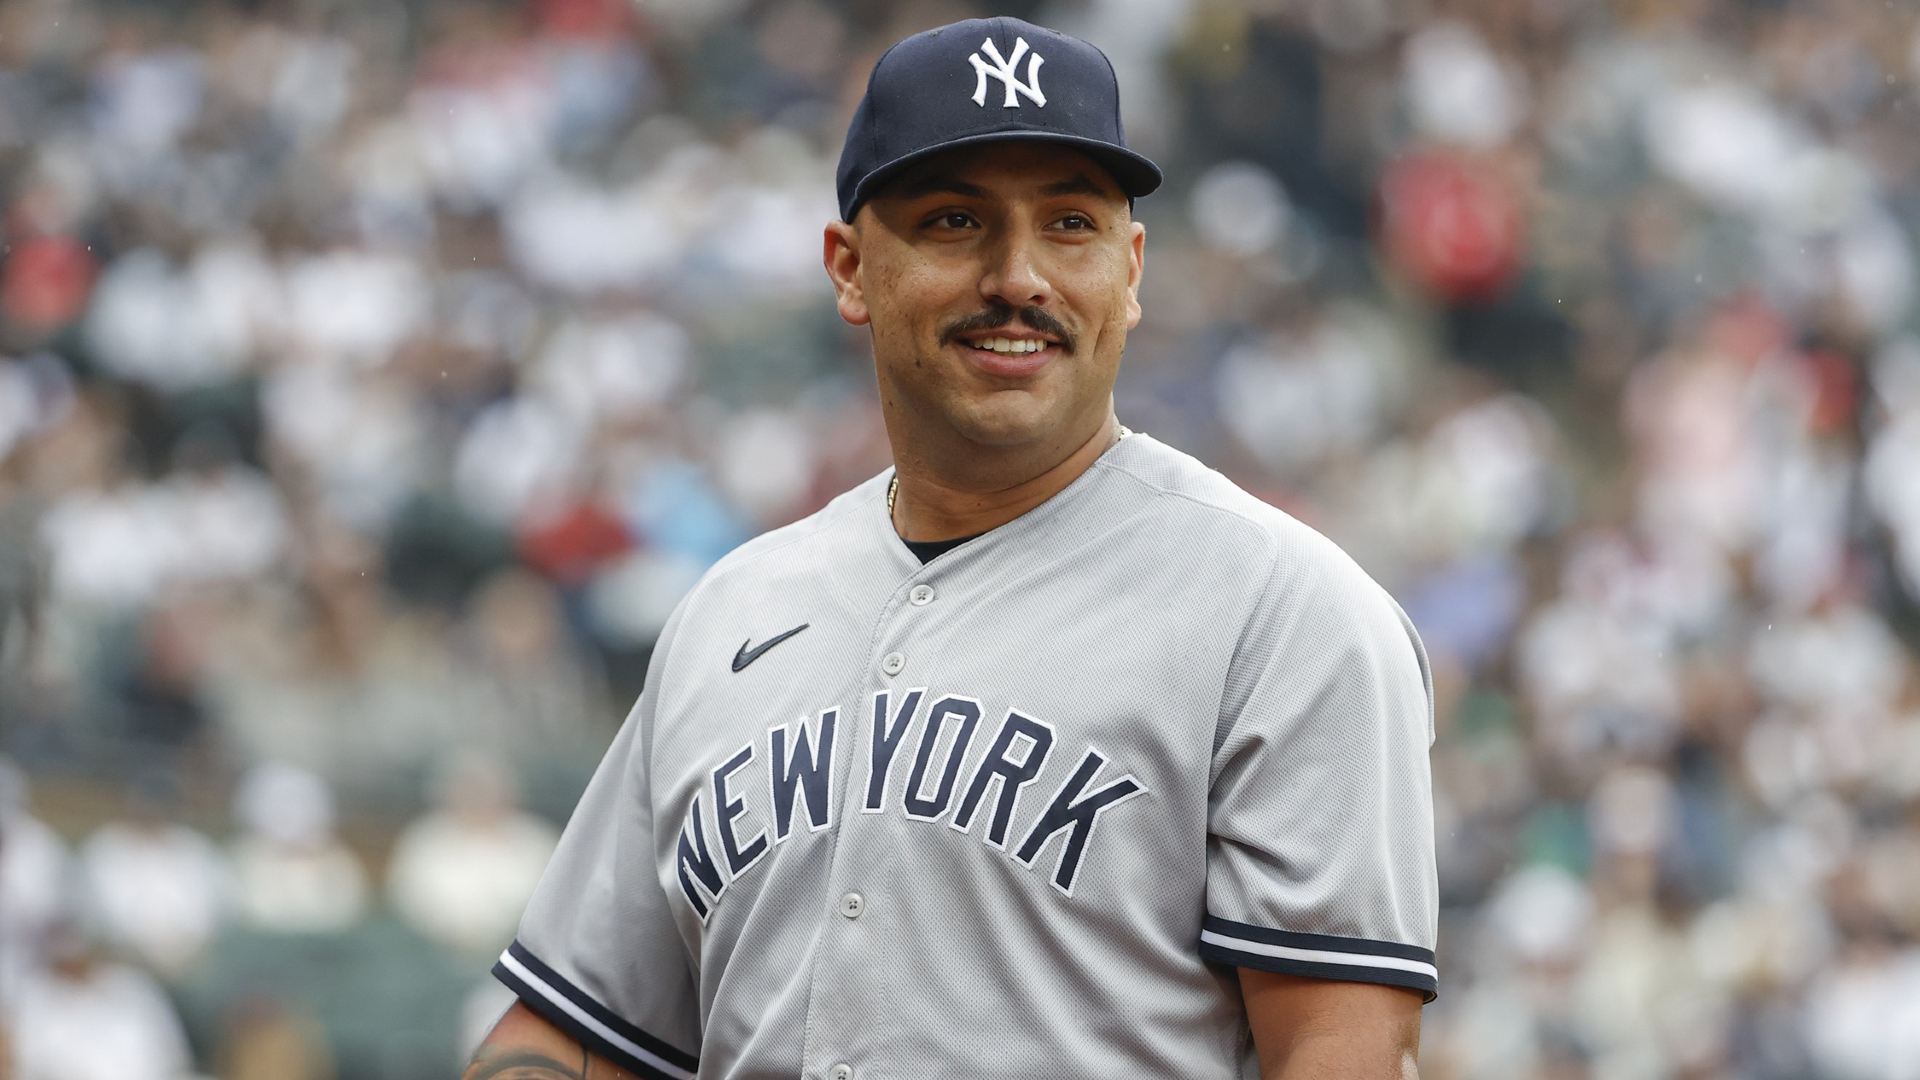 Nestor Cortes' recent stint with Yankees surpasses opening one